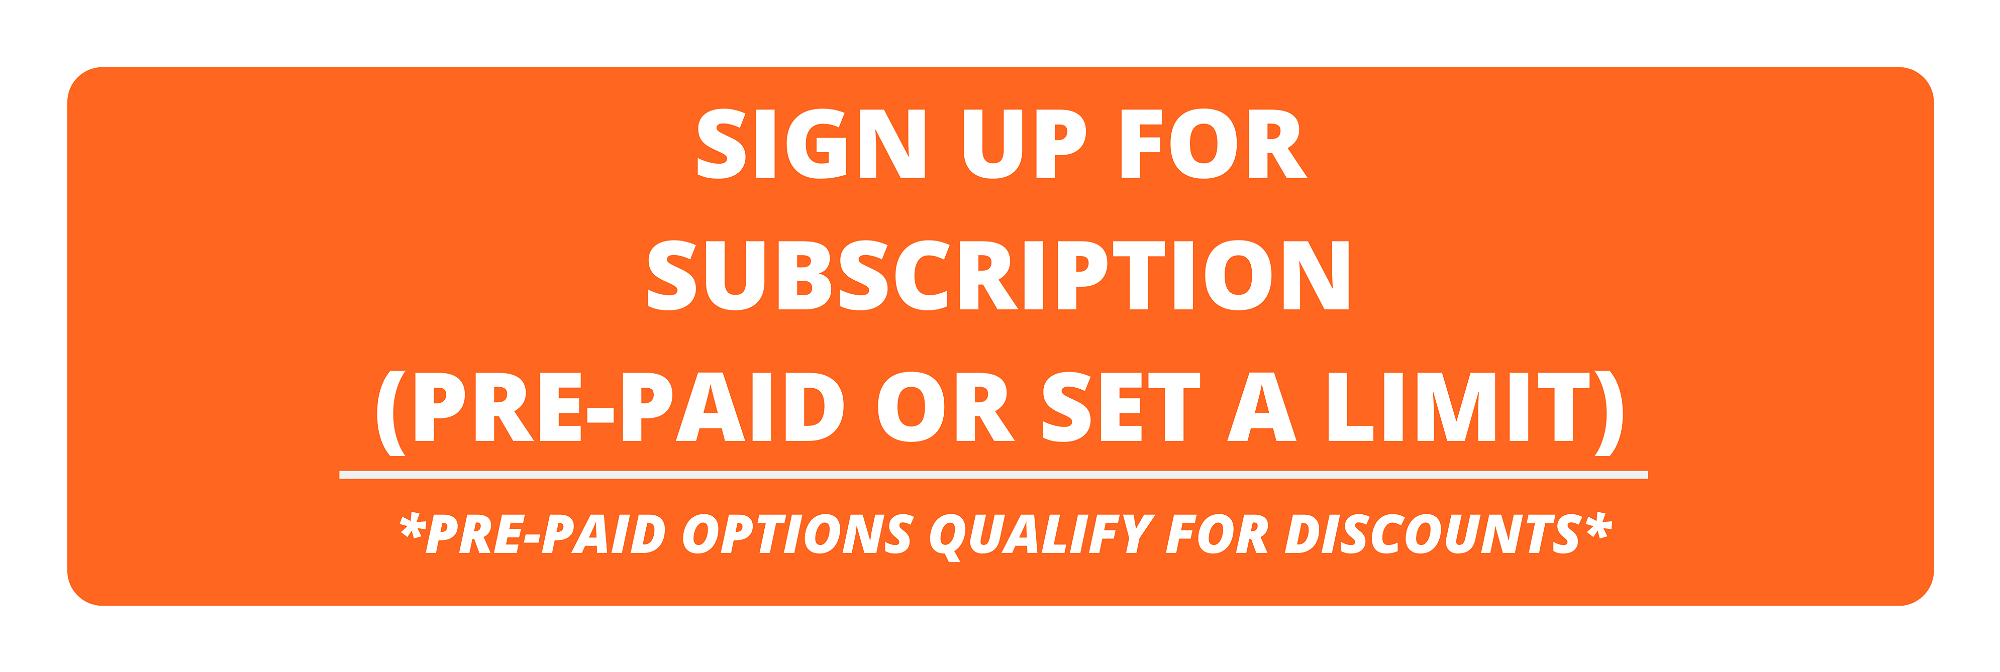 sign up for subscription (pre-paid or set a limit) * note: this subscription does not qualify for discounts *